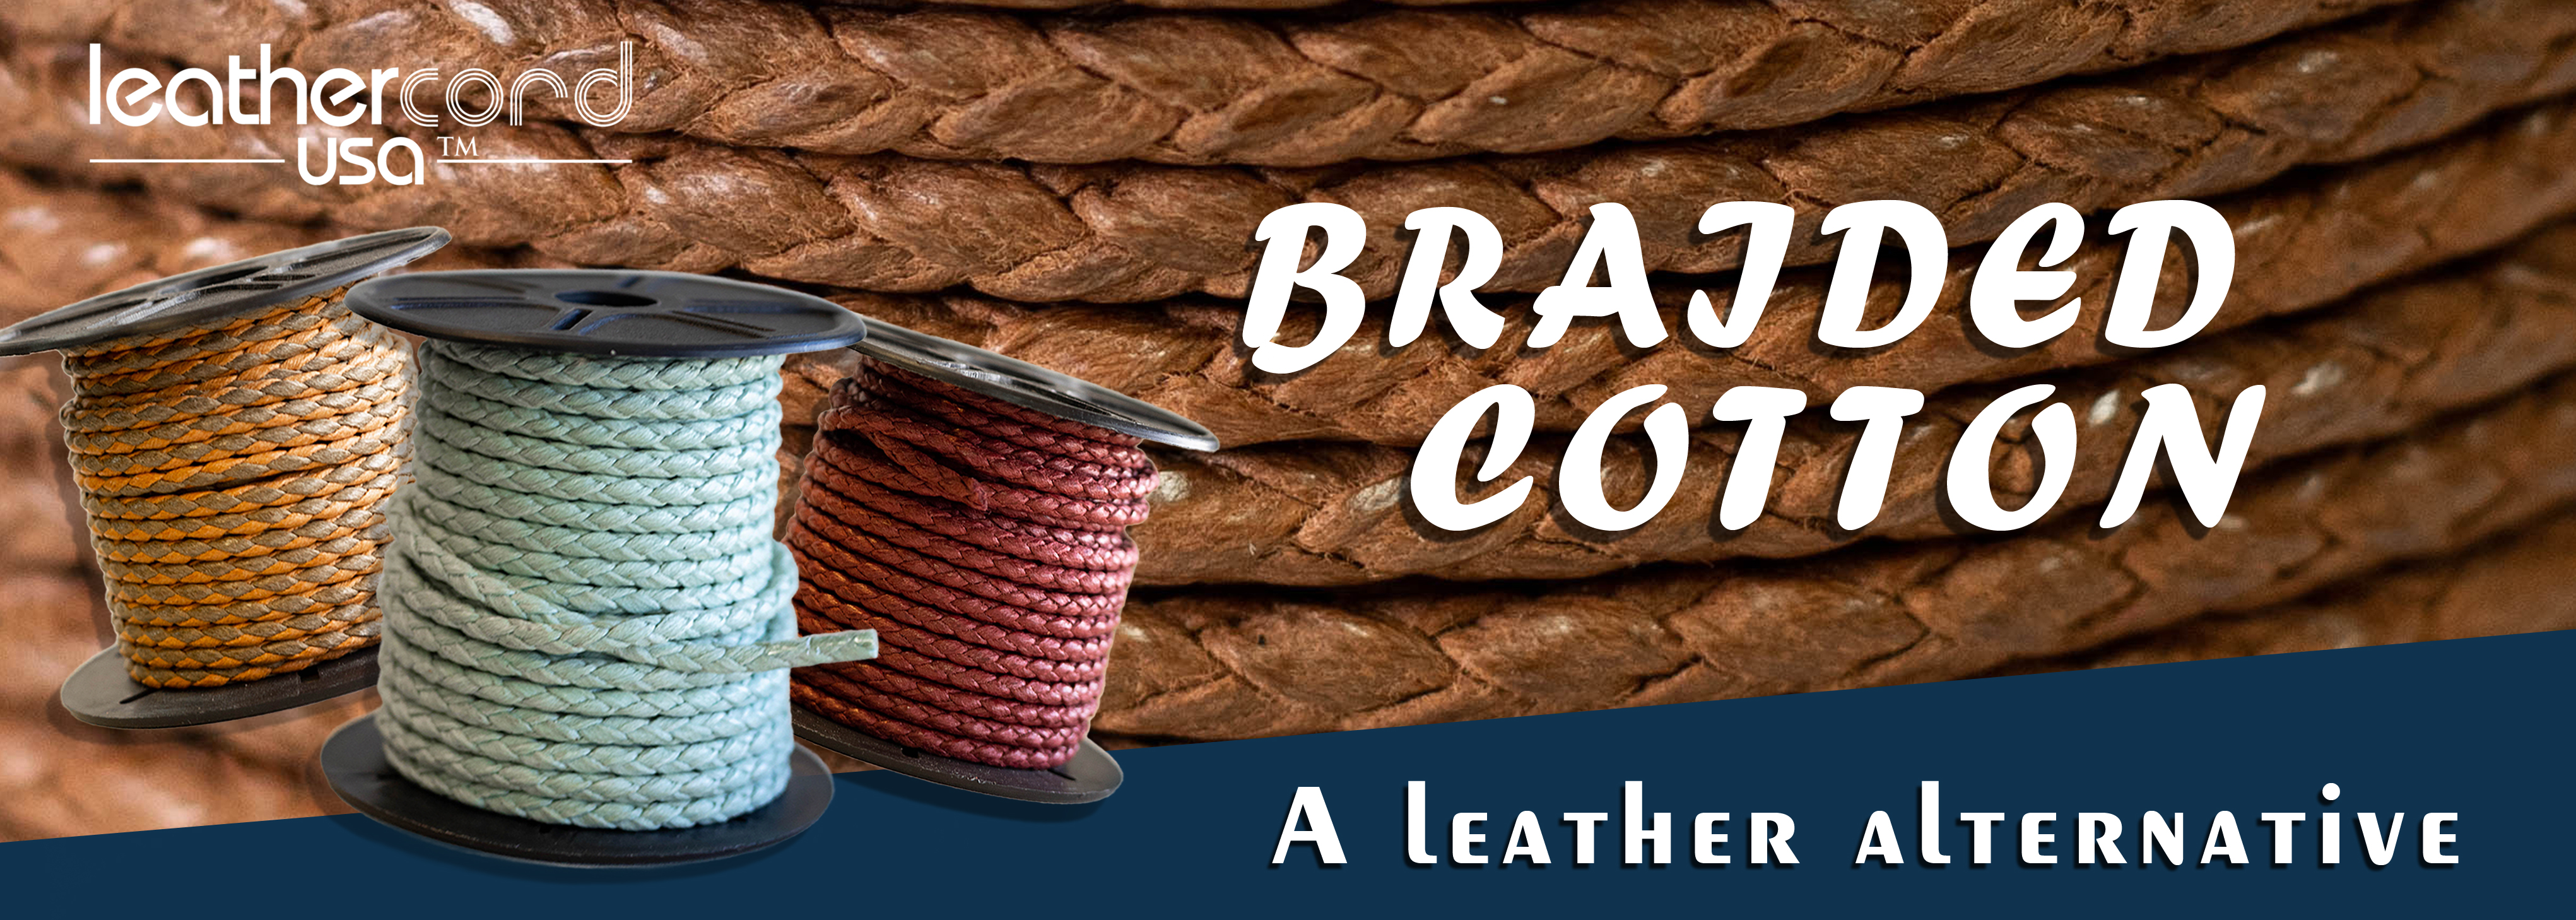 Leather Cord Wholesale Supplier